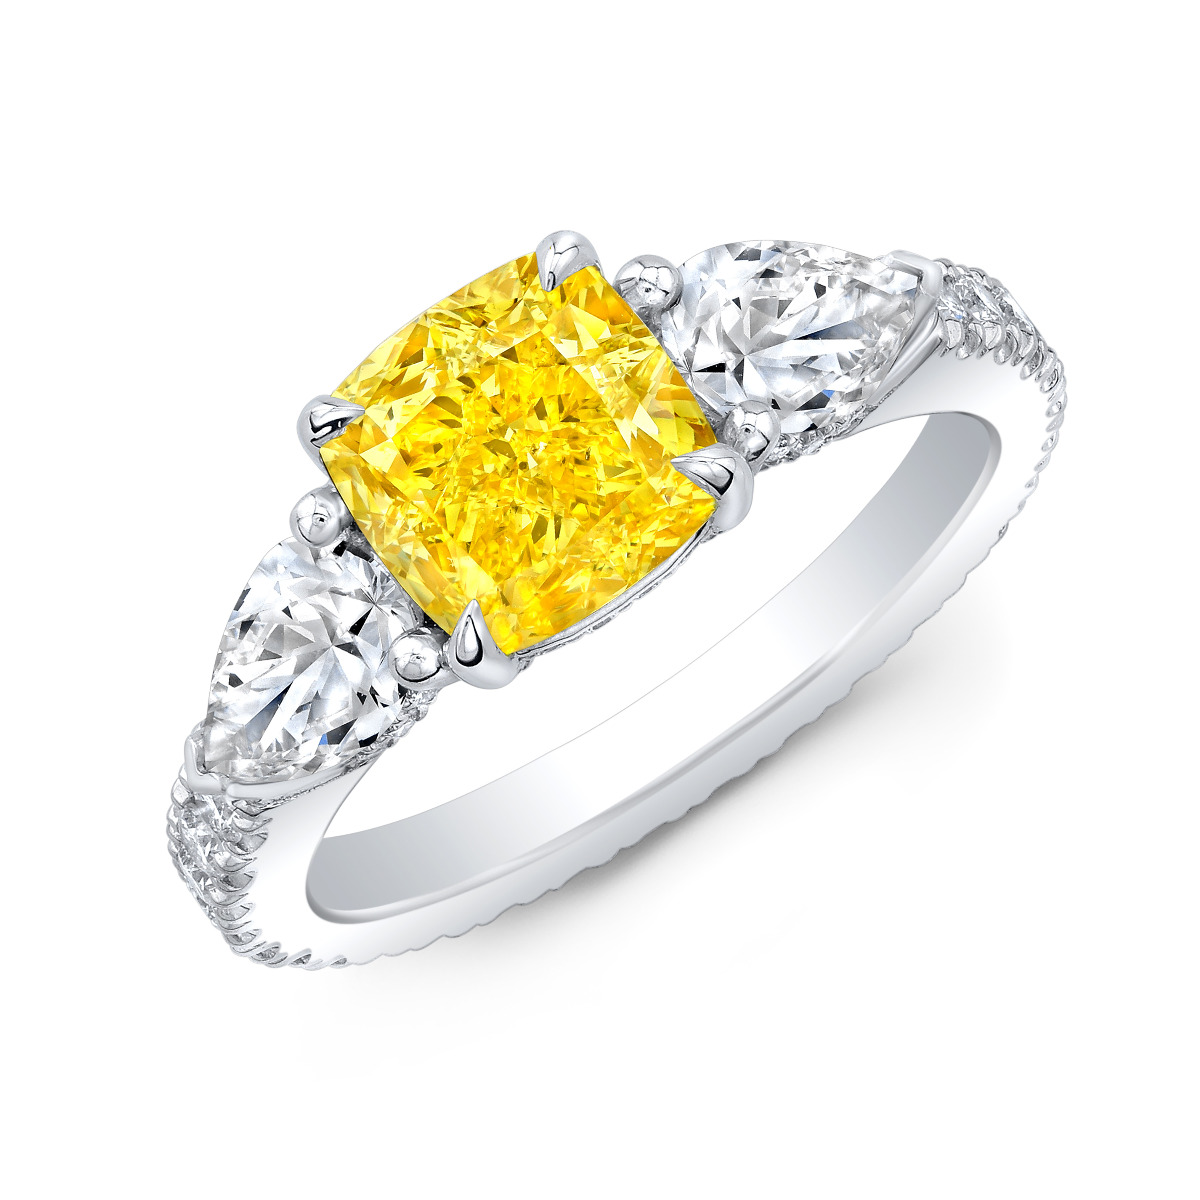 Featuring a Canary Yellow Cushion Cut center stone with beautiful Pear side stones on each side along with a Pave running down the shank.